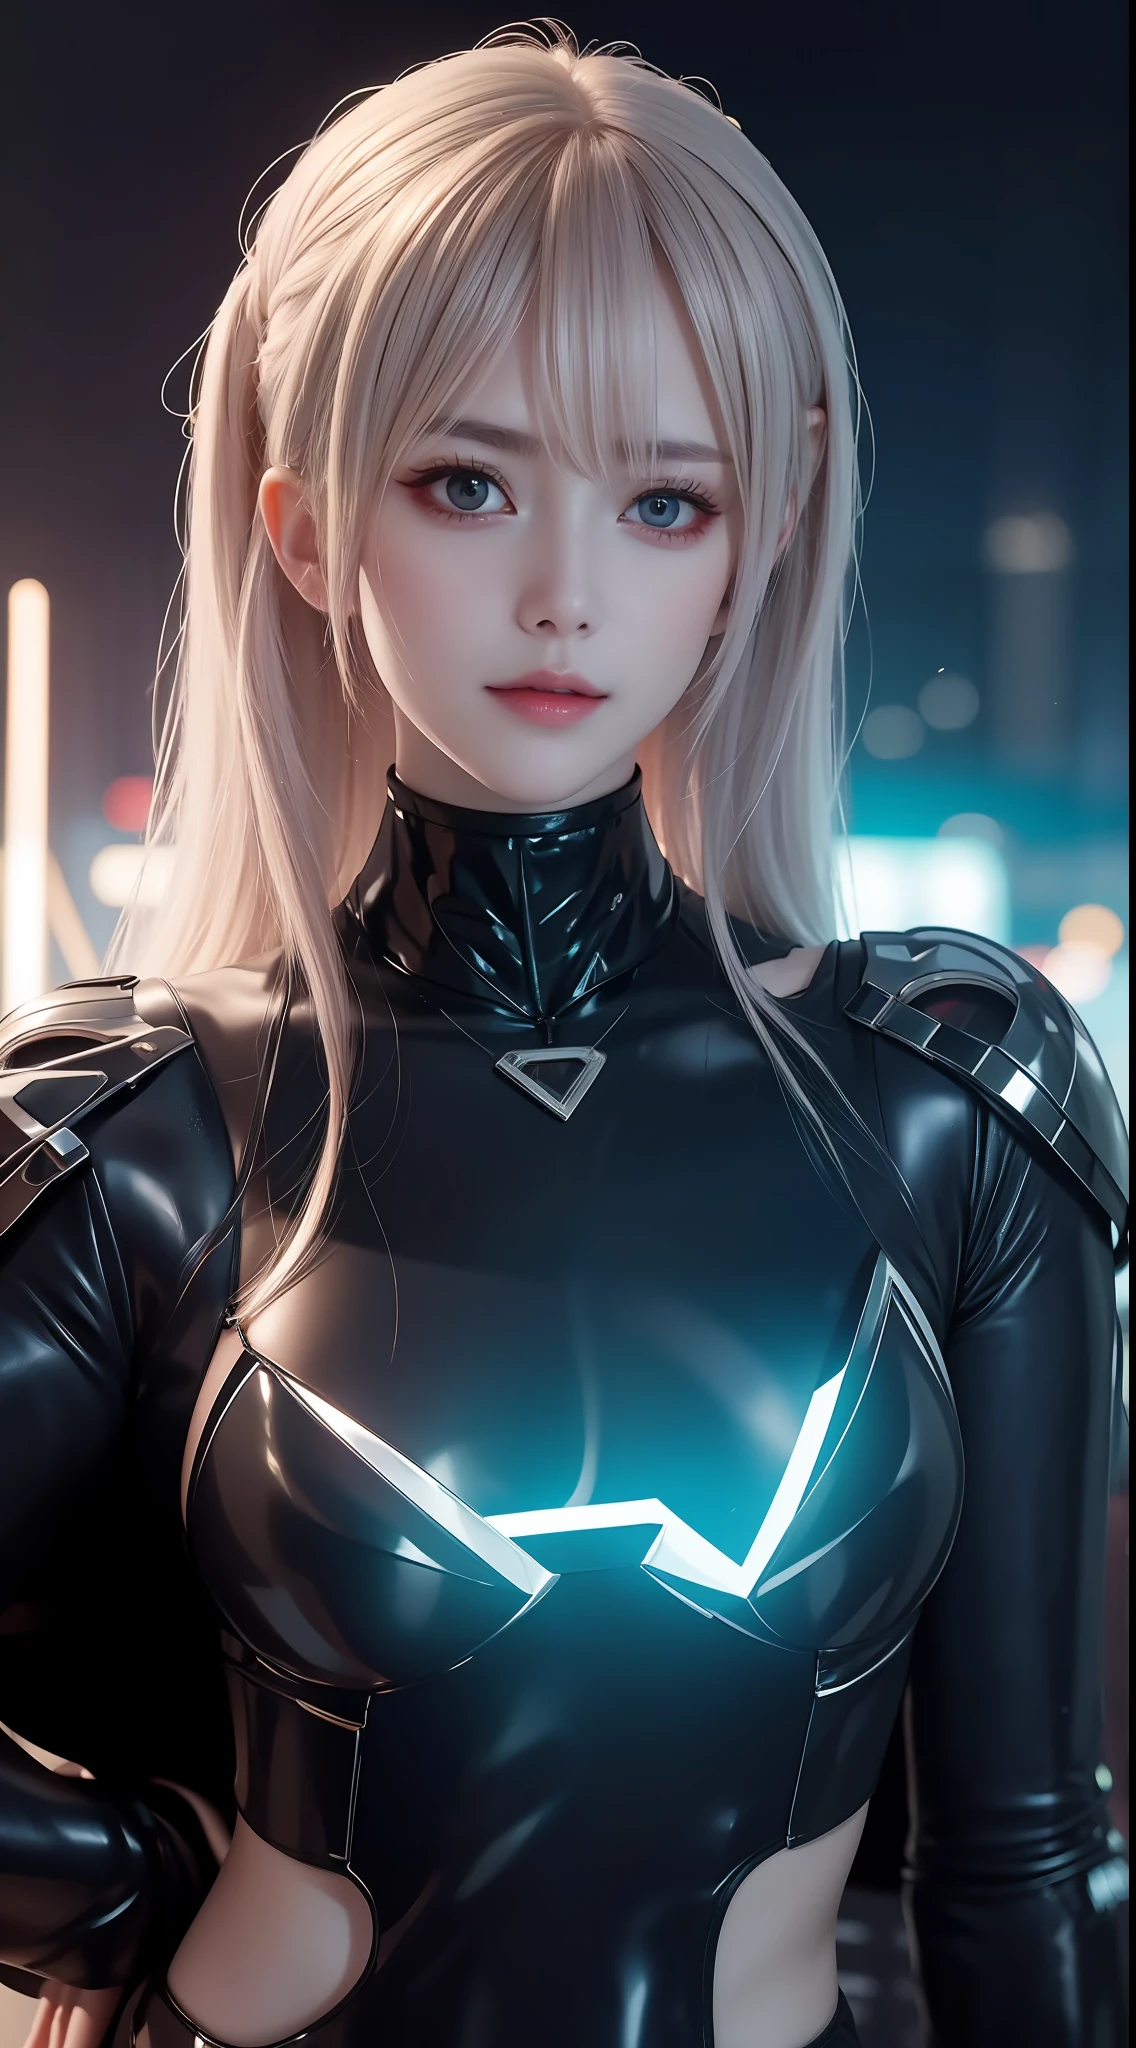 8K uhd, materpiece, a beautiful girl, detaild eye, good face, detaild eyebrow, beautiful outfit, lighting outfit, cyberpunk, Cyberspace, cyberpunk shining outfit, neon effect, many color of lighting, whole body capture,